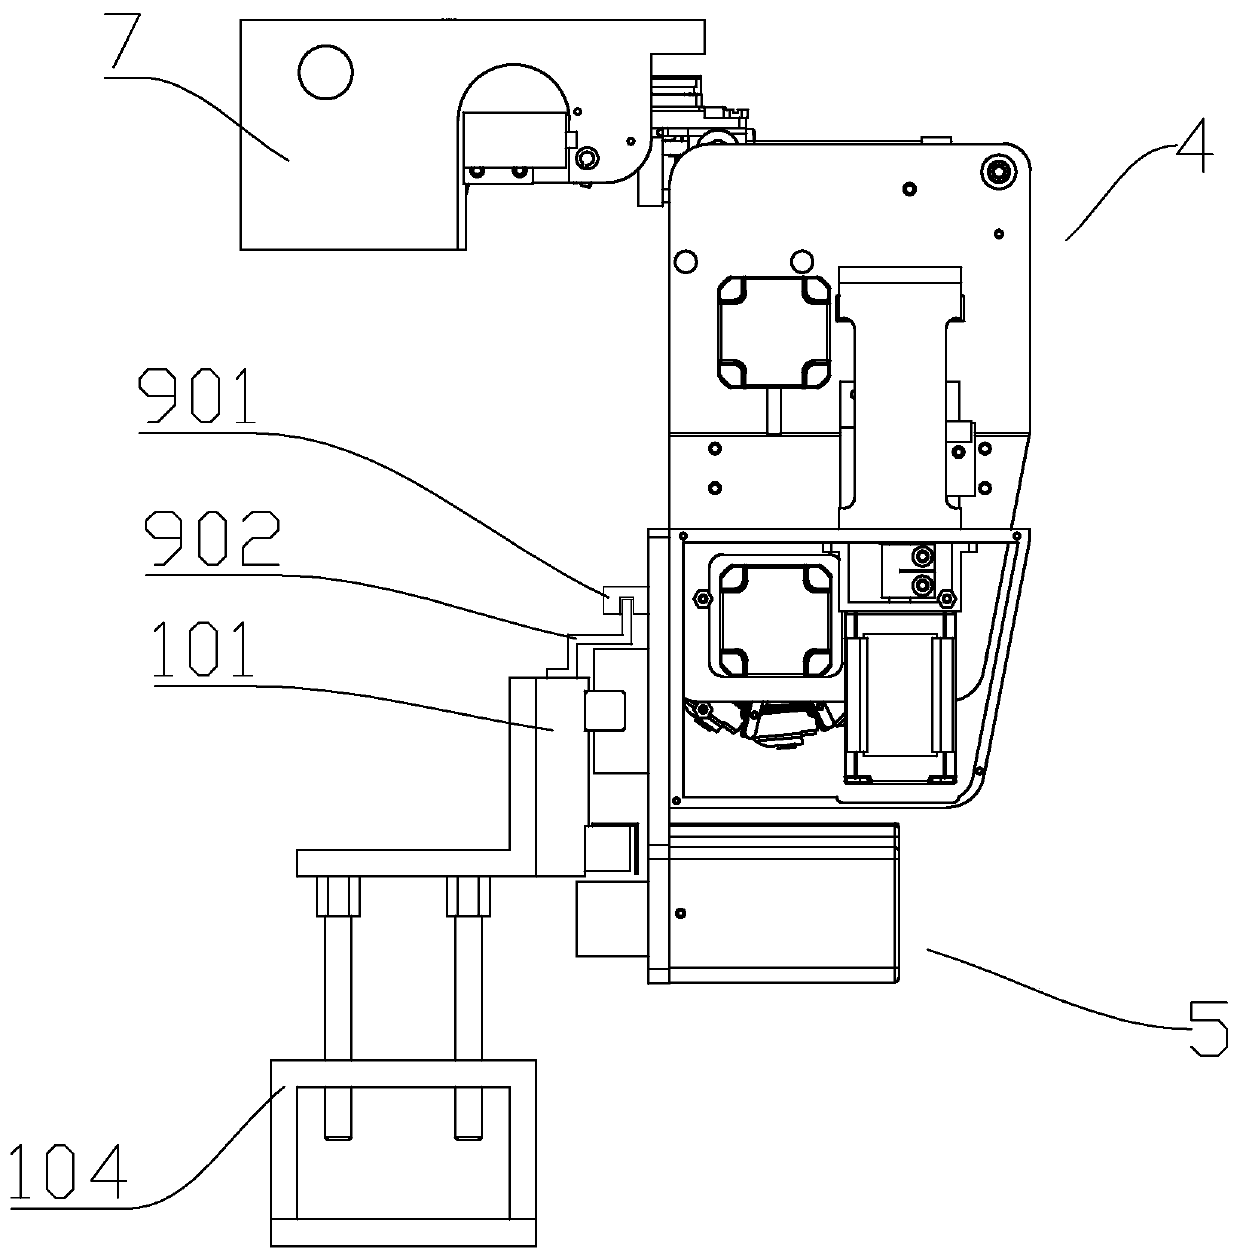 Multi-station automatic bobbin case replacing system and method